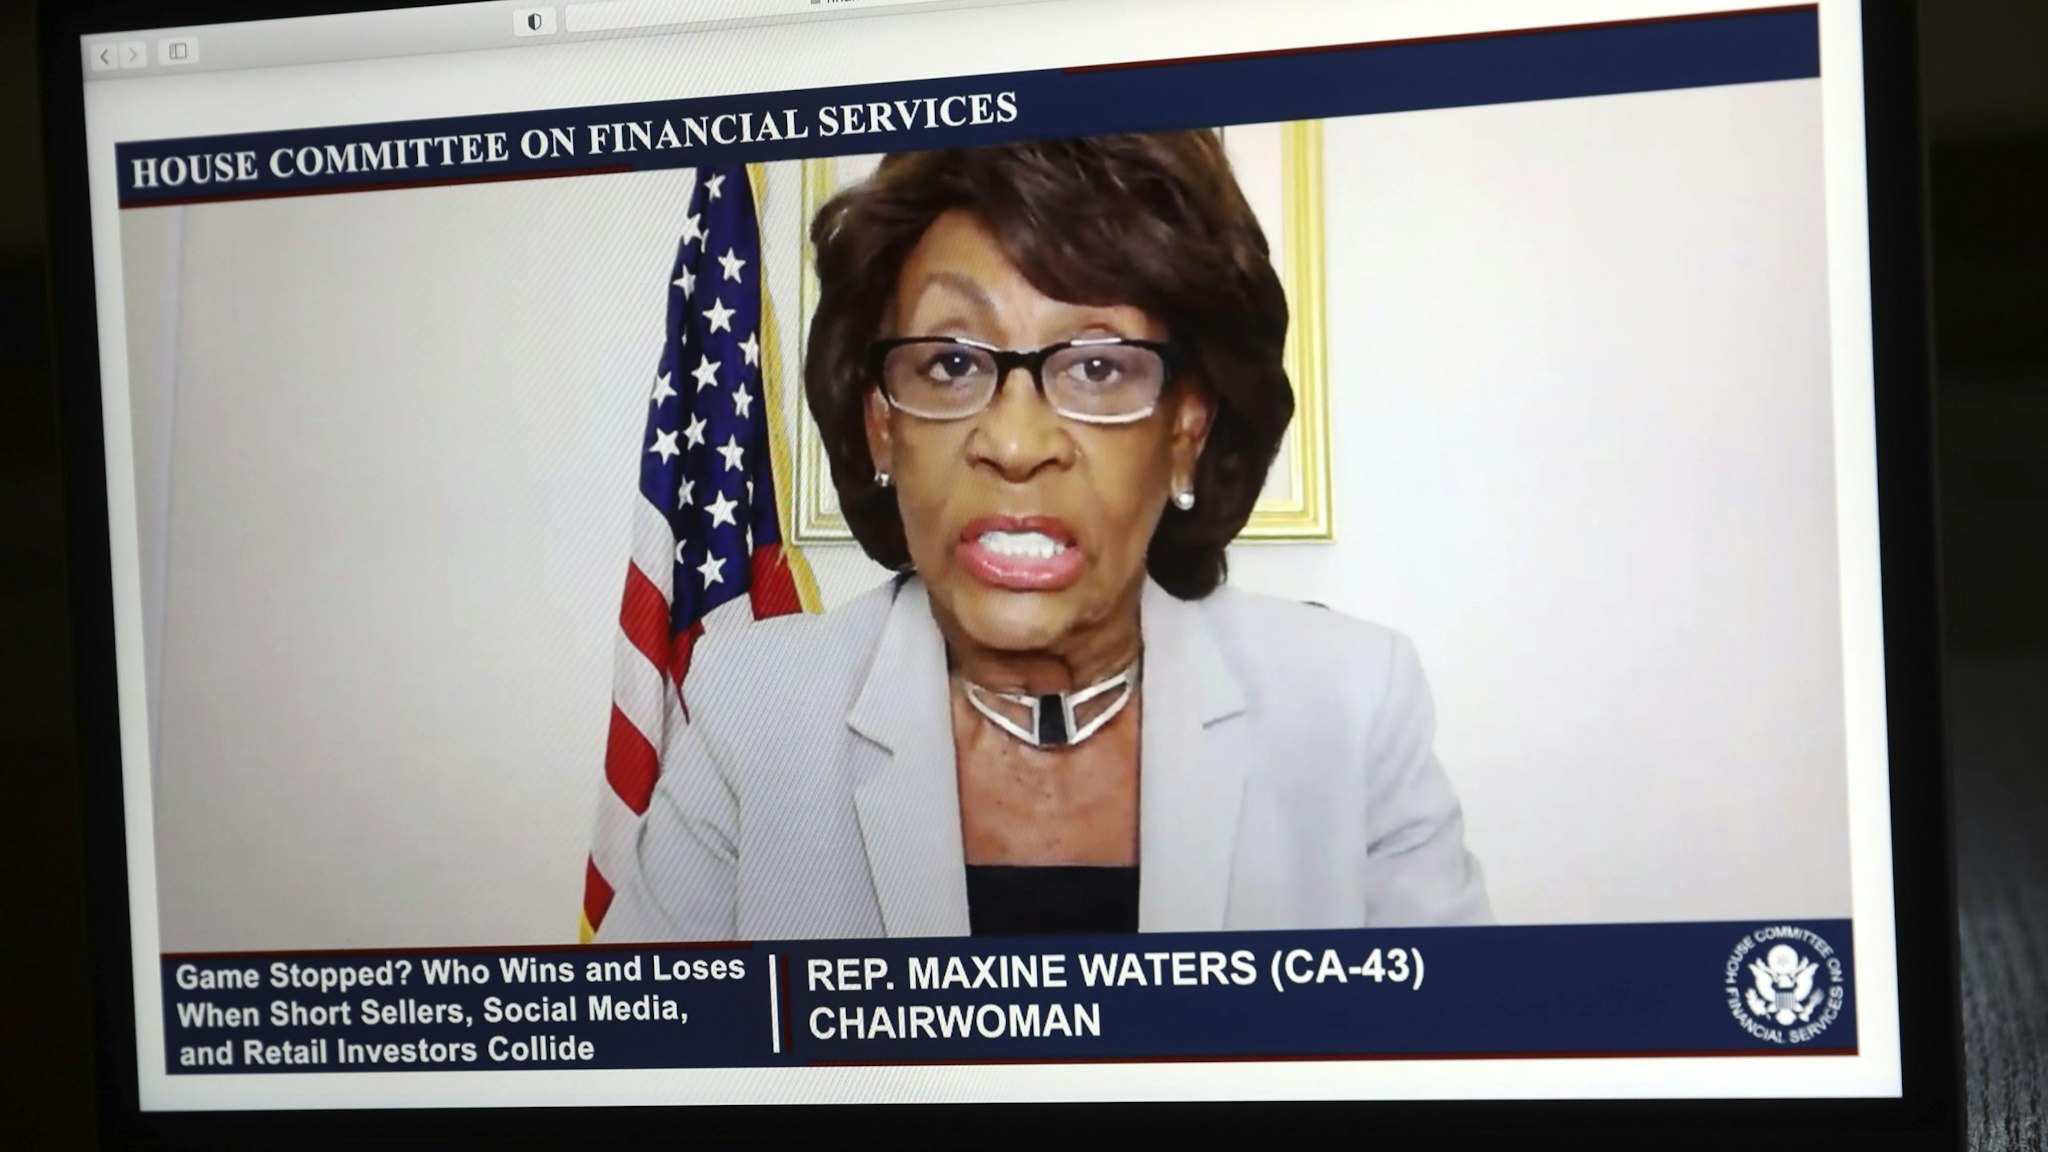 Representative Maxine Waters, a Democrat from California and chairwoman of the House Financial Services Committee, speaks virtually during a hearing on a laptop computer in Tiskilwa, Illinois, U.S., on Thursday, Feb. 18, 2021. Robinhood Markets and Citadel, central players in the GameStop Corp. saga that riveted markets last month plan to deliver a unified message to U.S. lawmakers that conspiracies swirling in Washington, that they worked together to harm retail investors are categorically false.